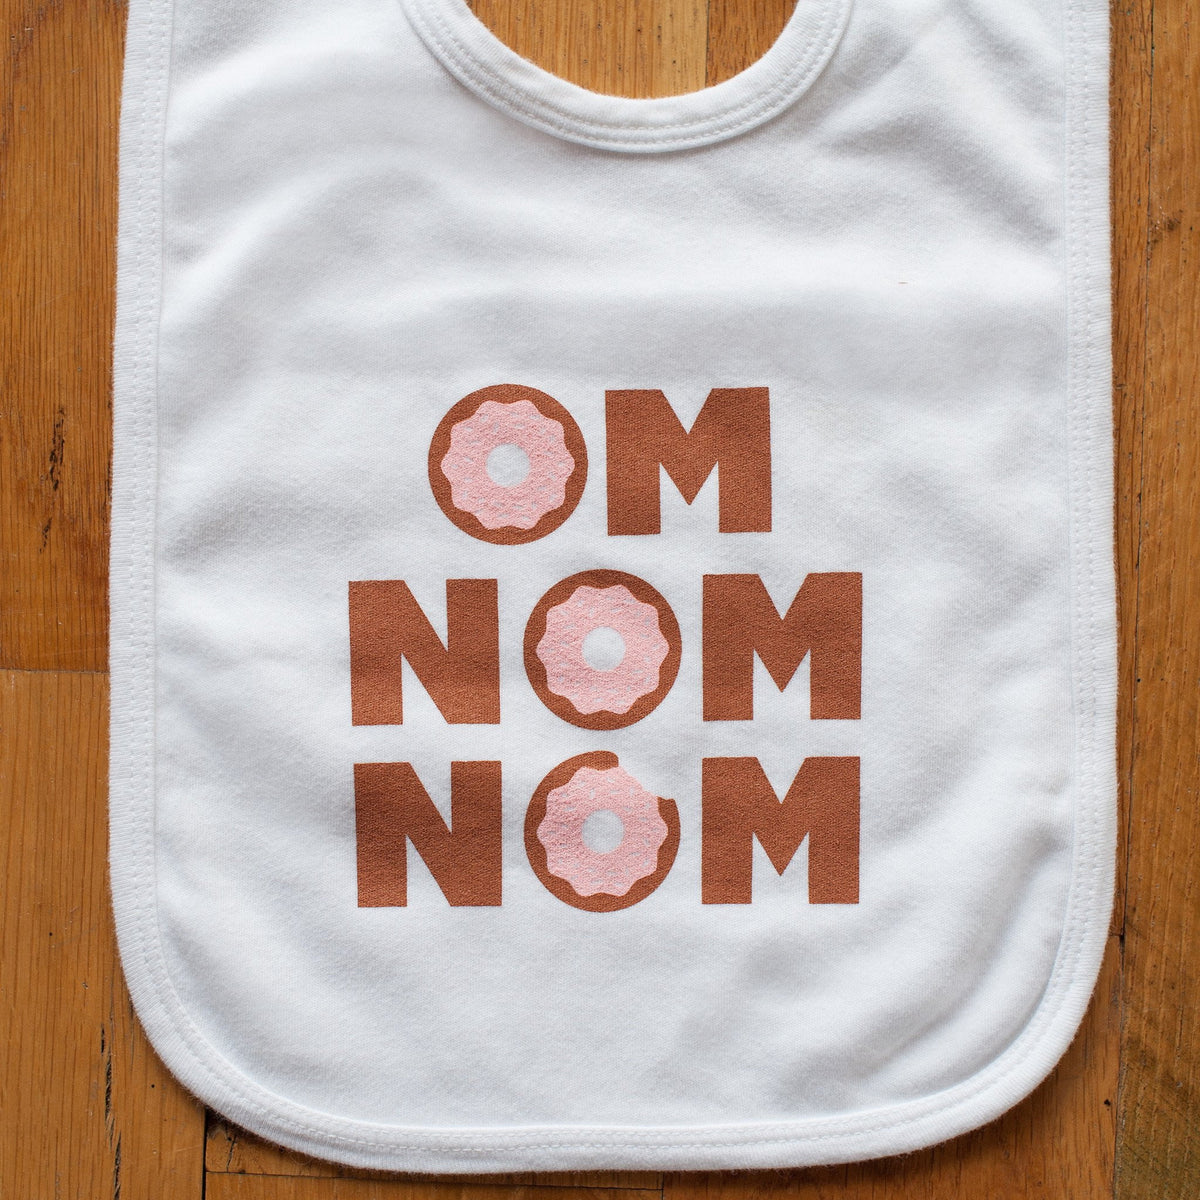 Donuts Baby Bib - Sweetpea and Co.